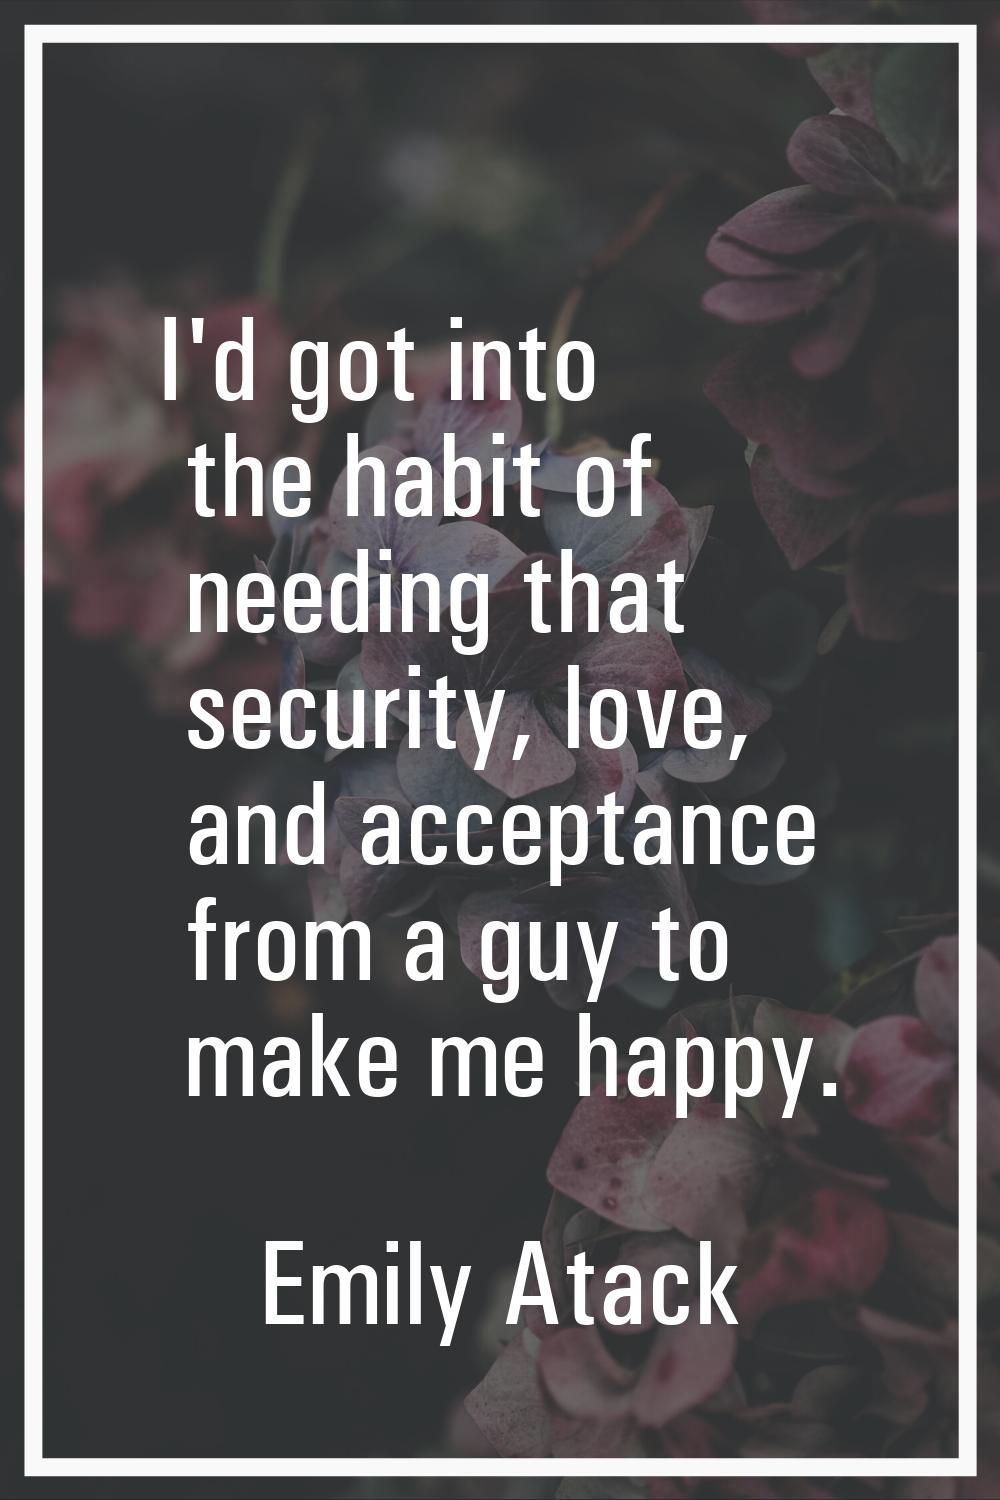 I'd got into the habit of needing that security, love, and acceptance from a guy to make me happy.